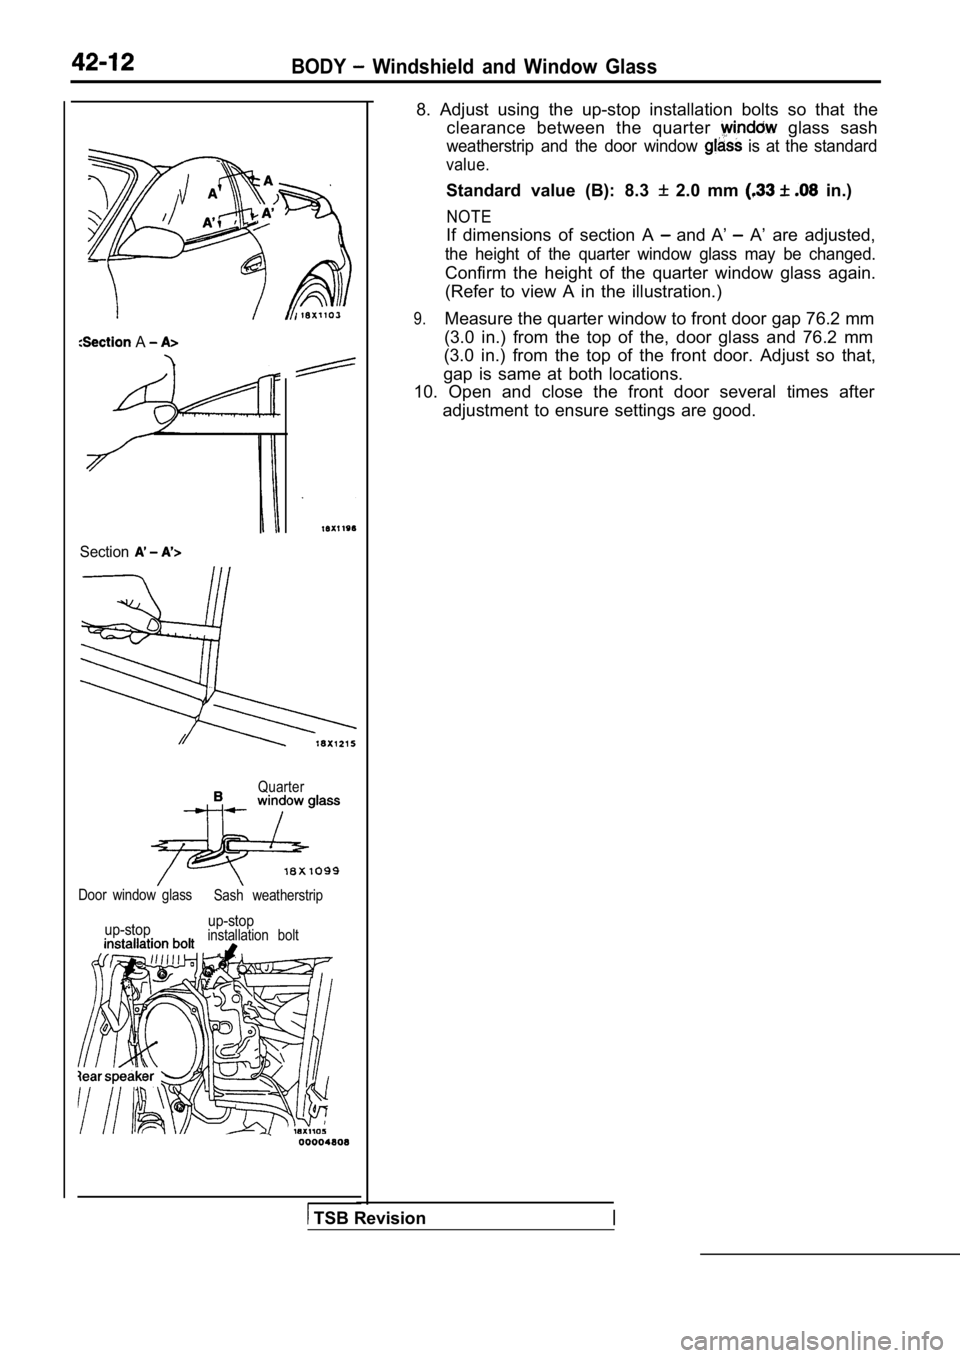 MITSUBISHI SPYDER 1990  Service Repair Manual BODY  Windshield  and  Window  Glass
 A 
Section
Quarter
Door  window  glassSash  weatherstrip
up-stopup-stopinstallation  bolt
8.  Adjust  using  the  up-stop  installation  bolts  so  t
hat  the
cle